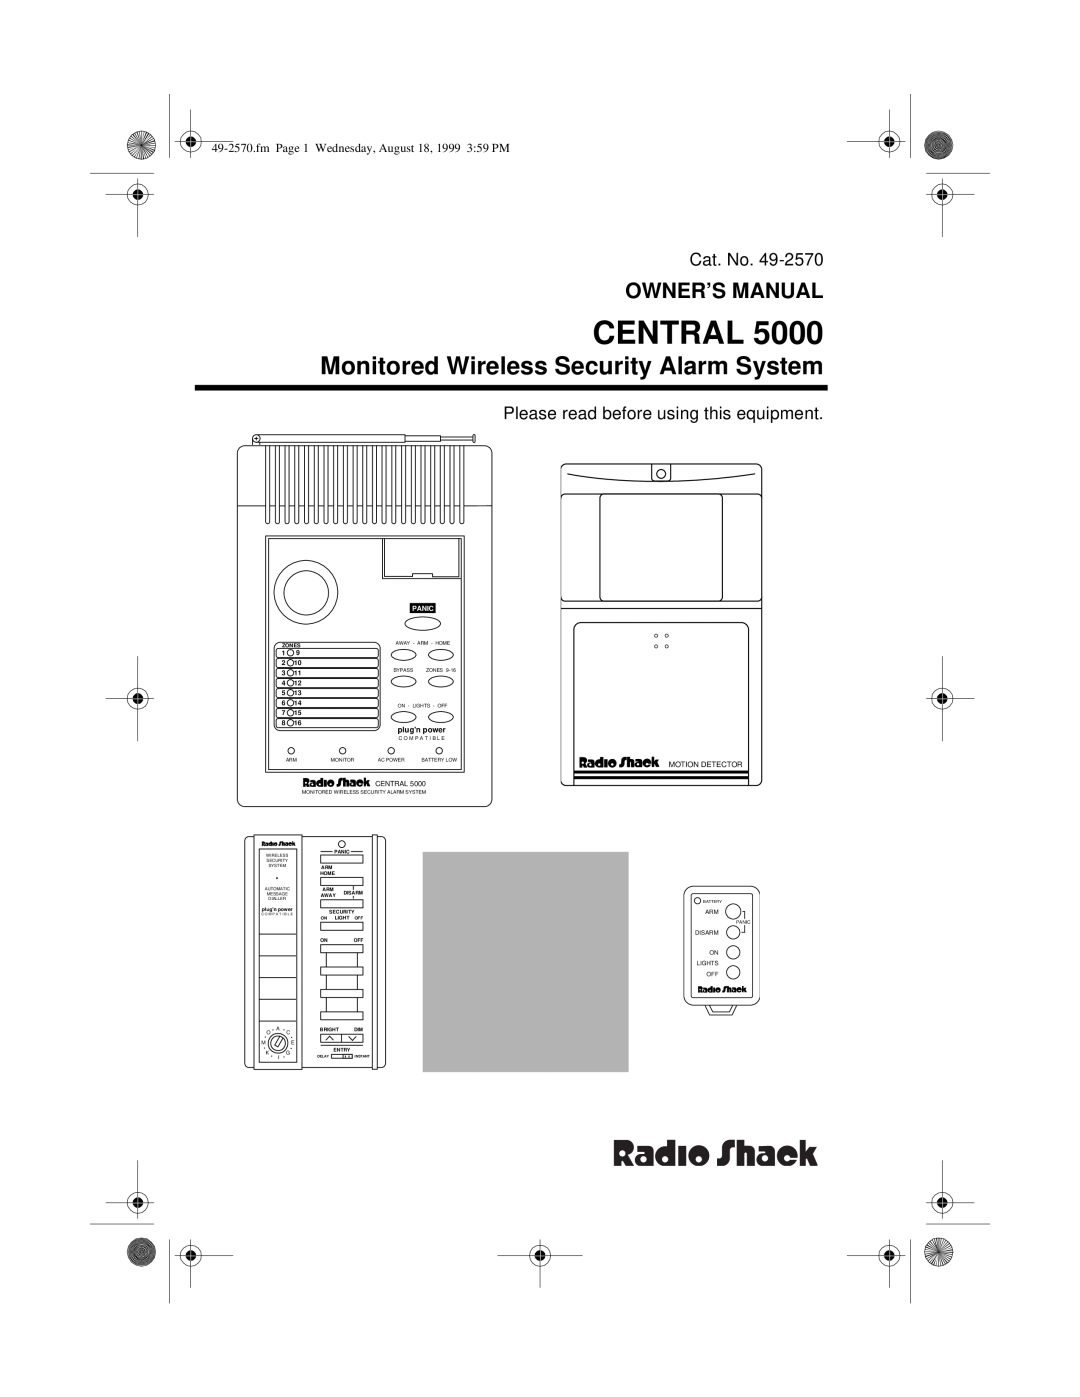 Radio Shack 49-2570 owner manual Monitored Wireless Security Alarm System, Central, plugn power, Motion Detector, Panic 